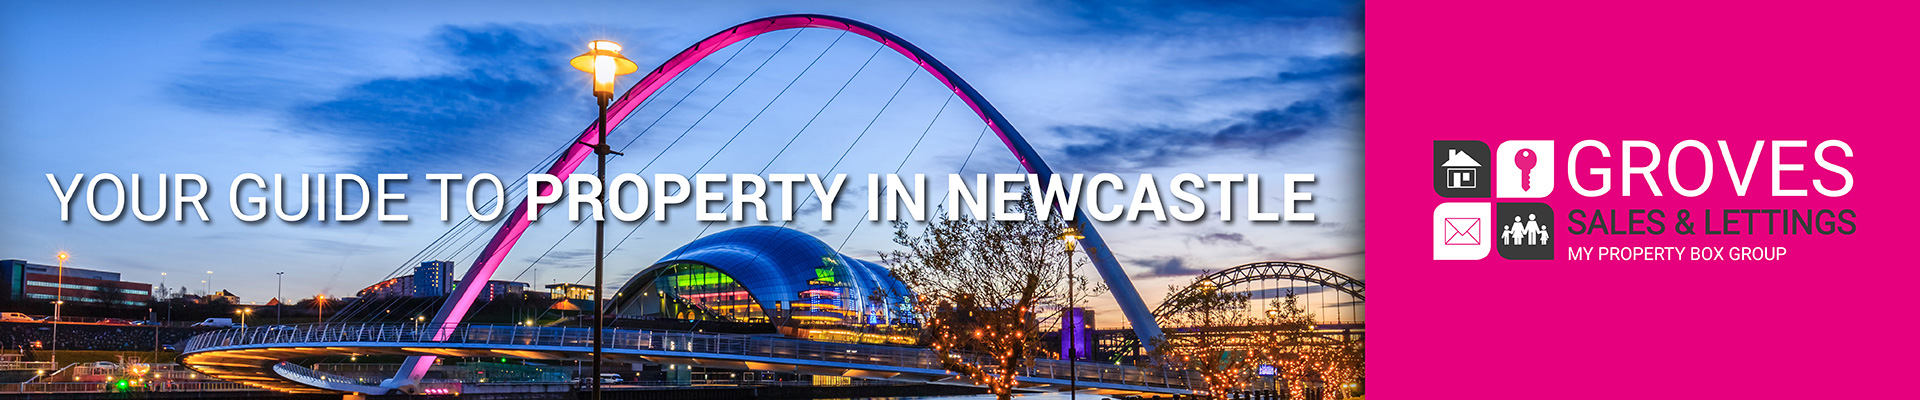 Your guide to property in Newcastle